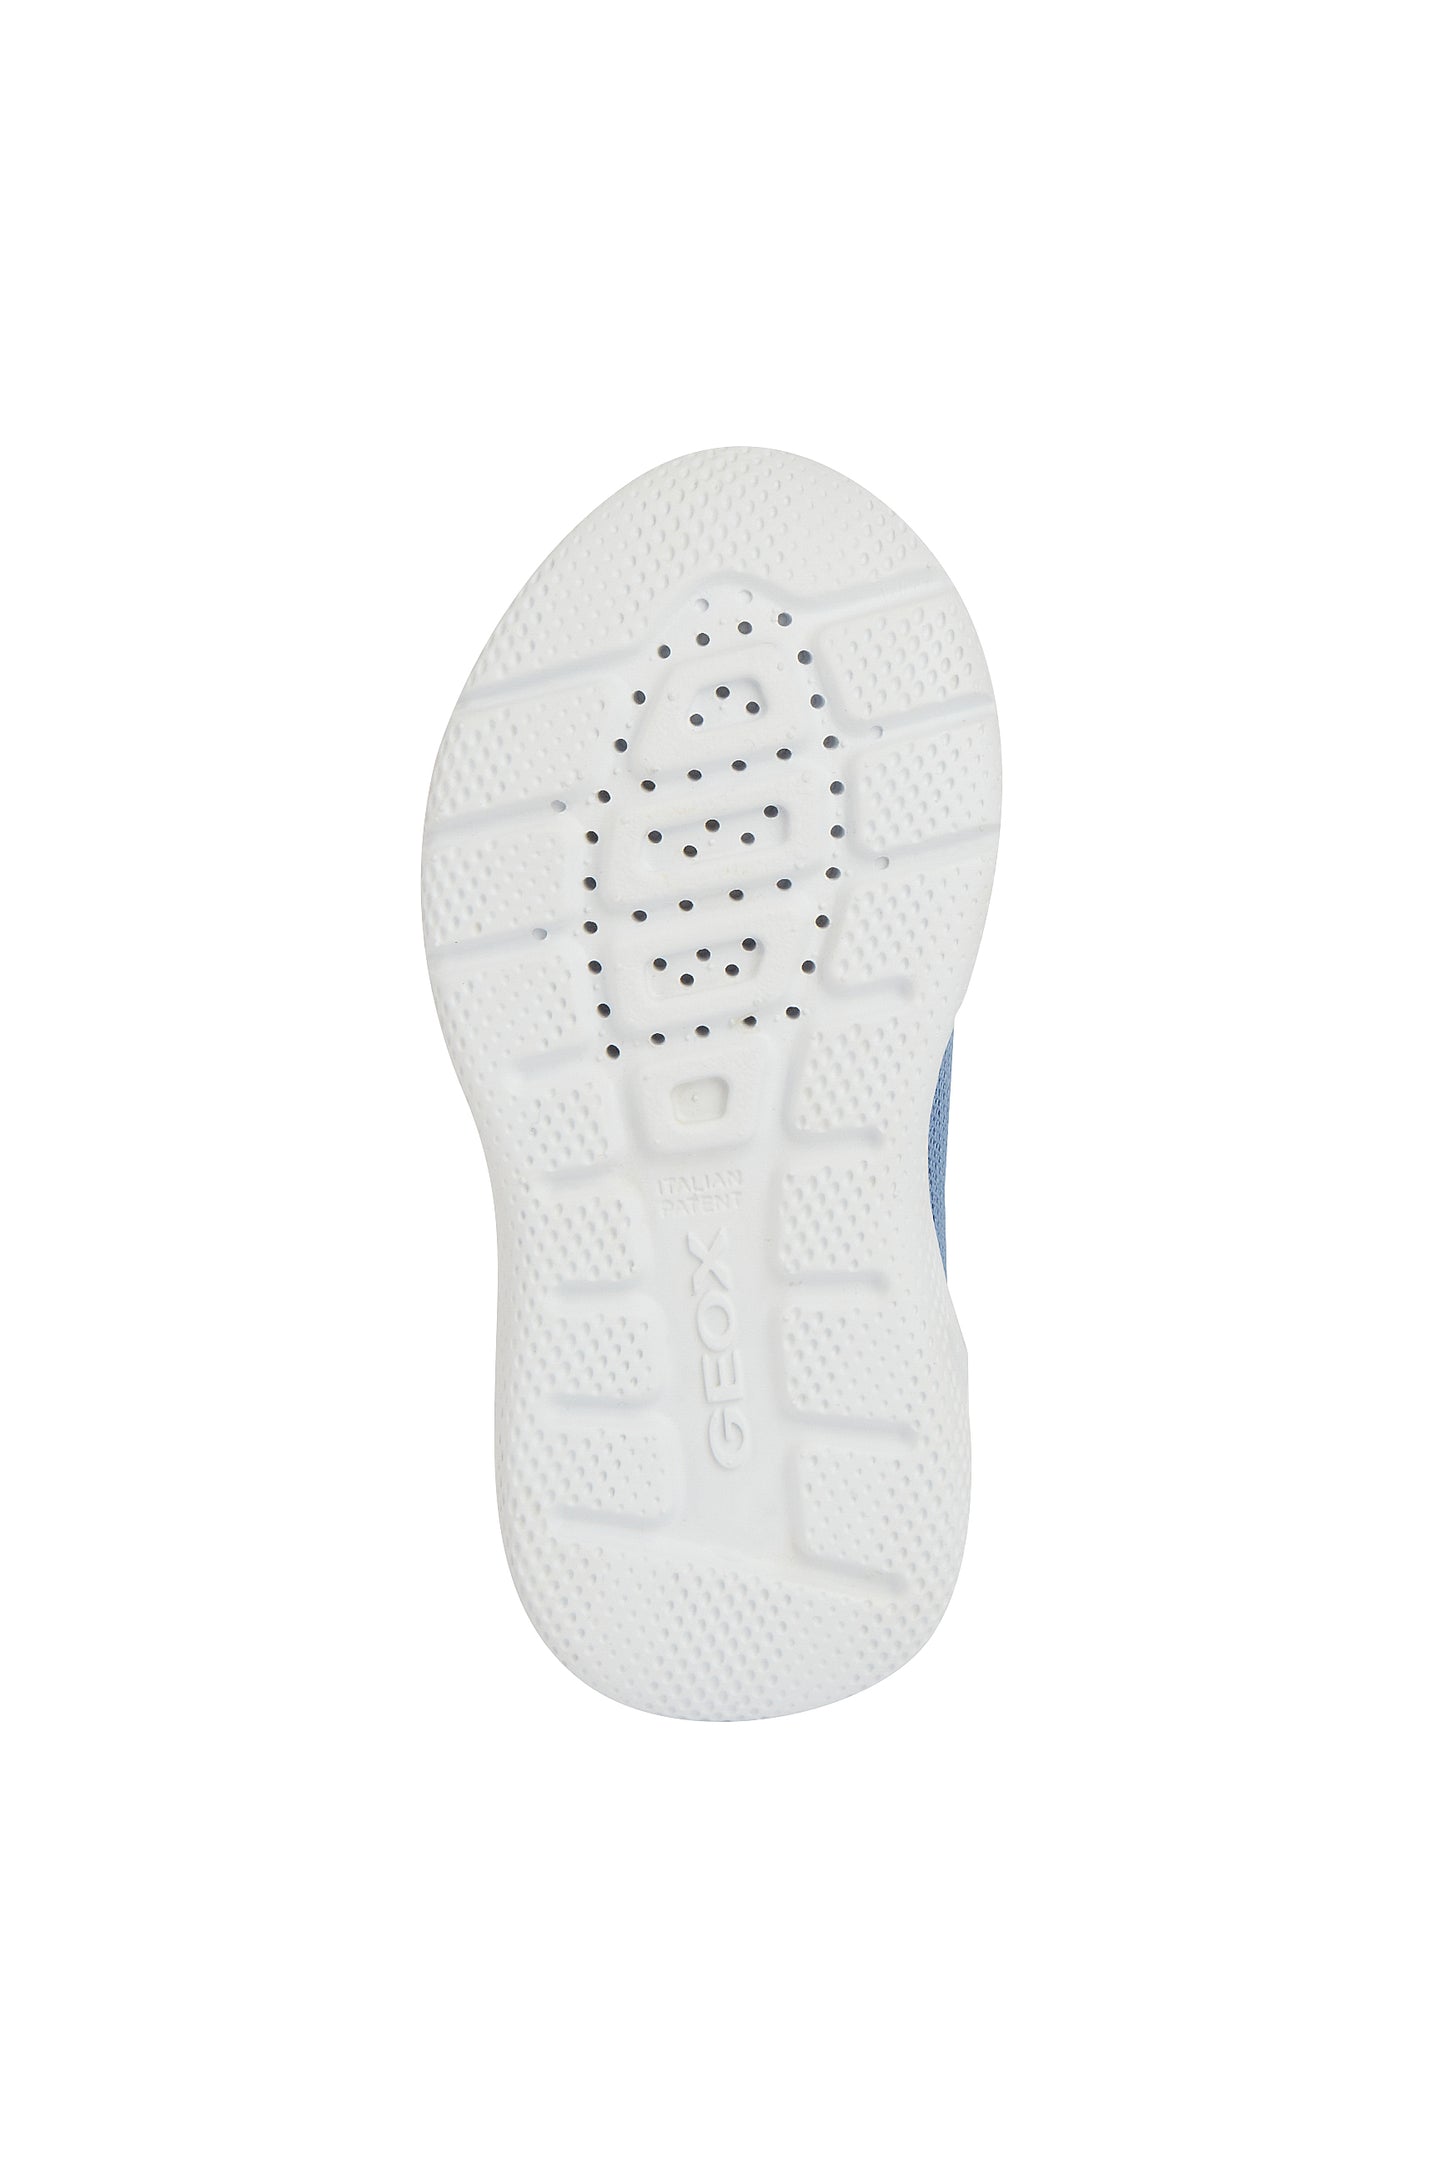 A girls trainer by Geox, style B Sprintye, in blue with silver glitter trim, wing detail and double velcro fastening. View of white sole.